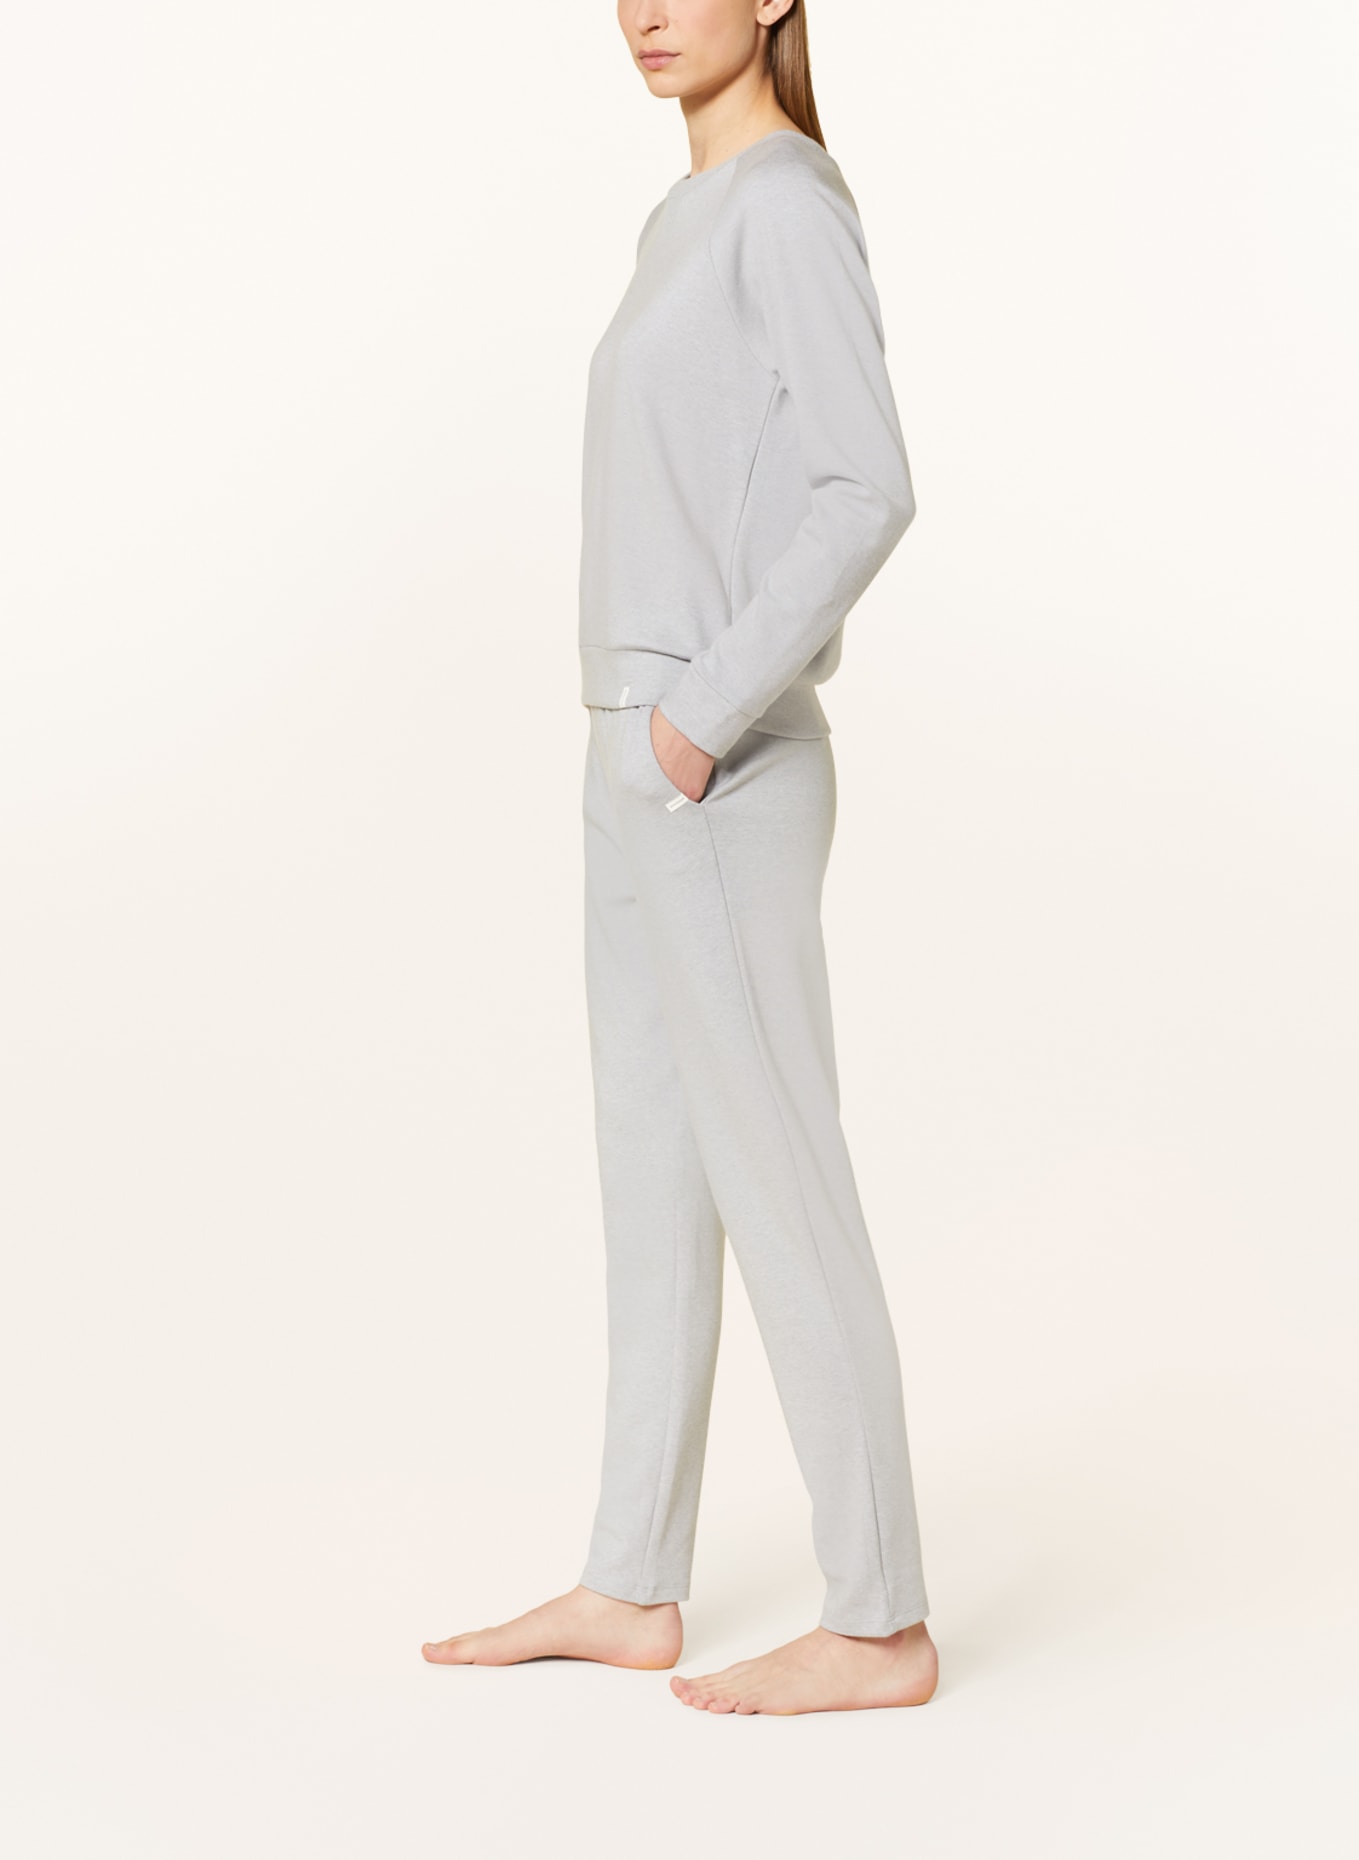 SCHIESSER Lounge pants MIX+RELAX, Color: LIGHT GRAY (Image 4)